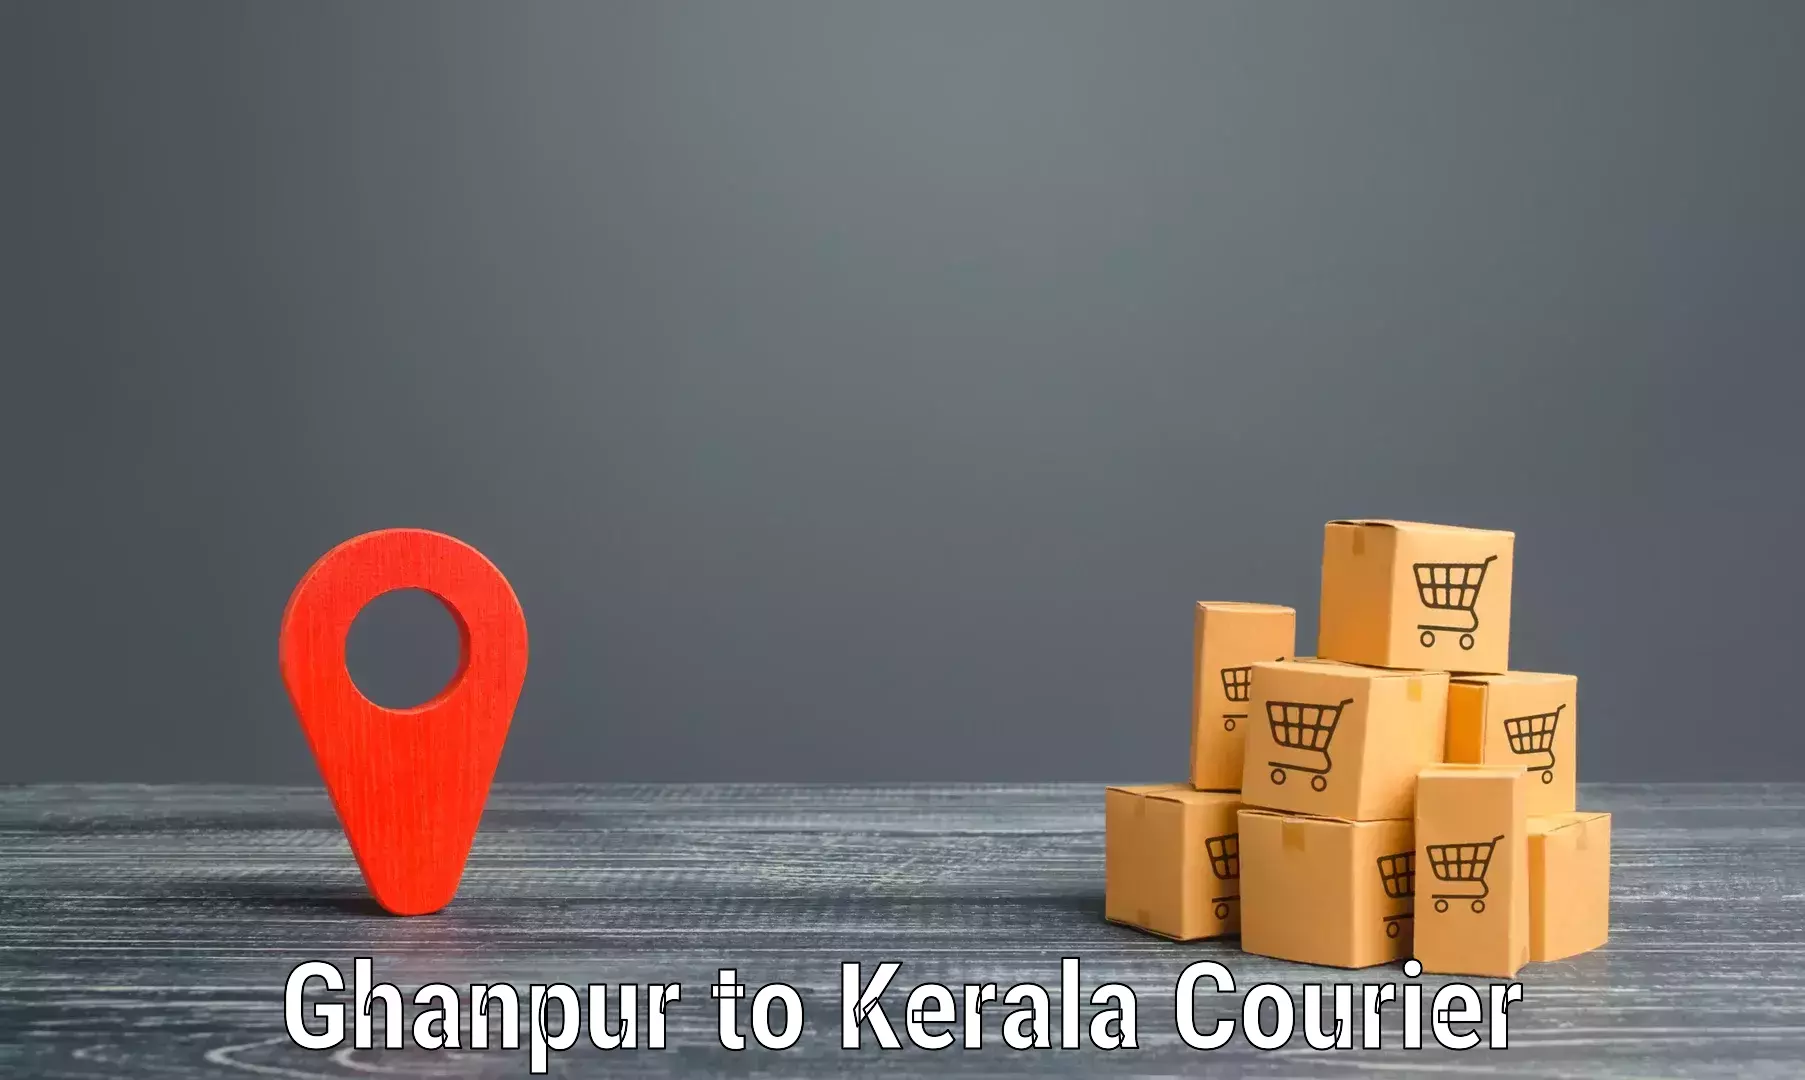 Express delivery solutions Ghanpur to Cherpulassery